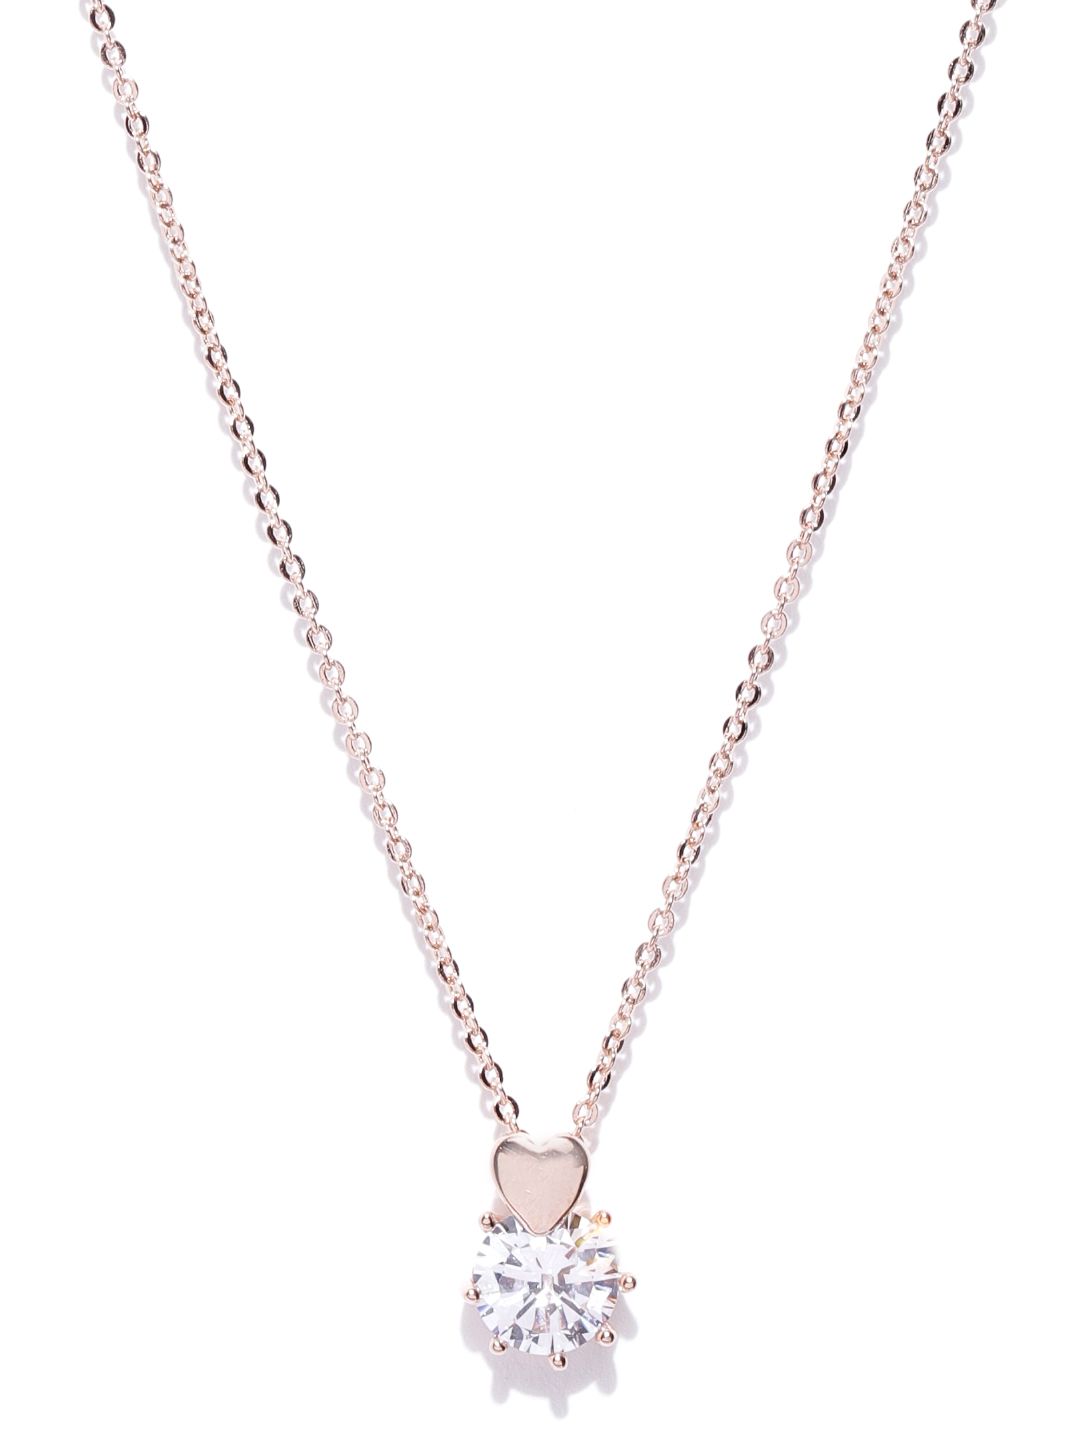 Carlton London Rose Gold-Plated CZ Studded Necklace Price in India